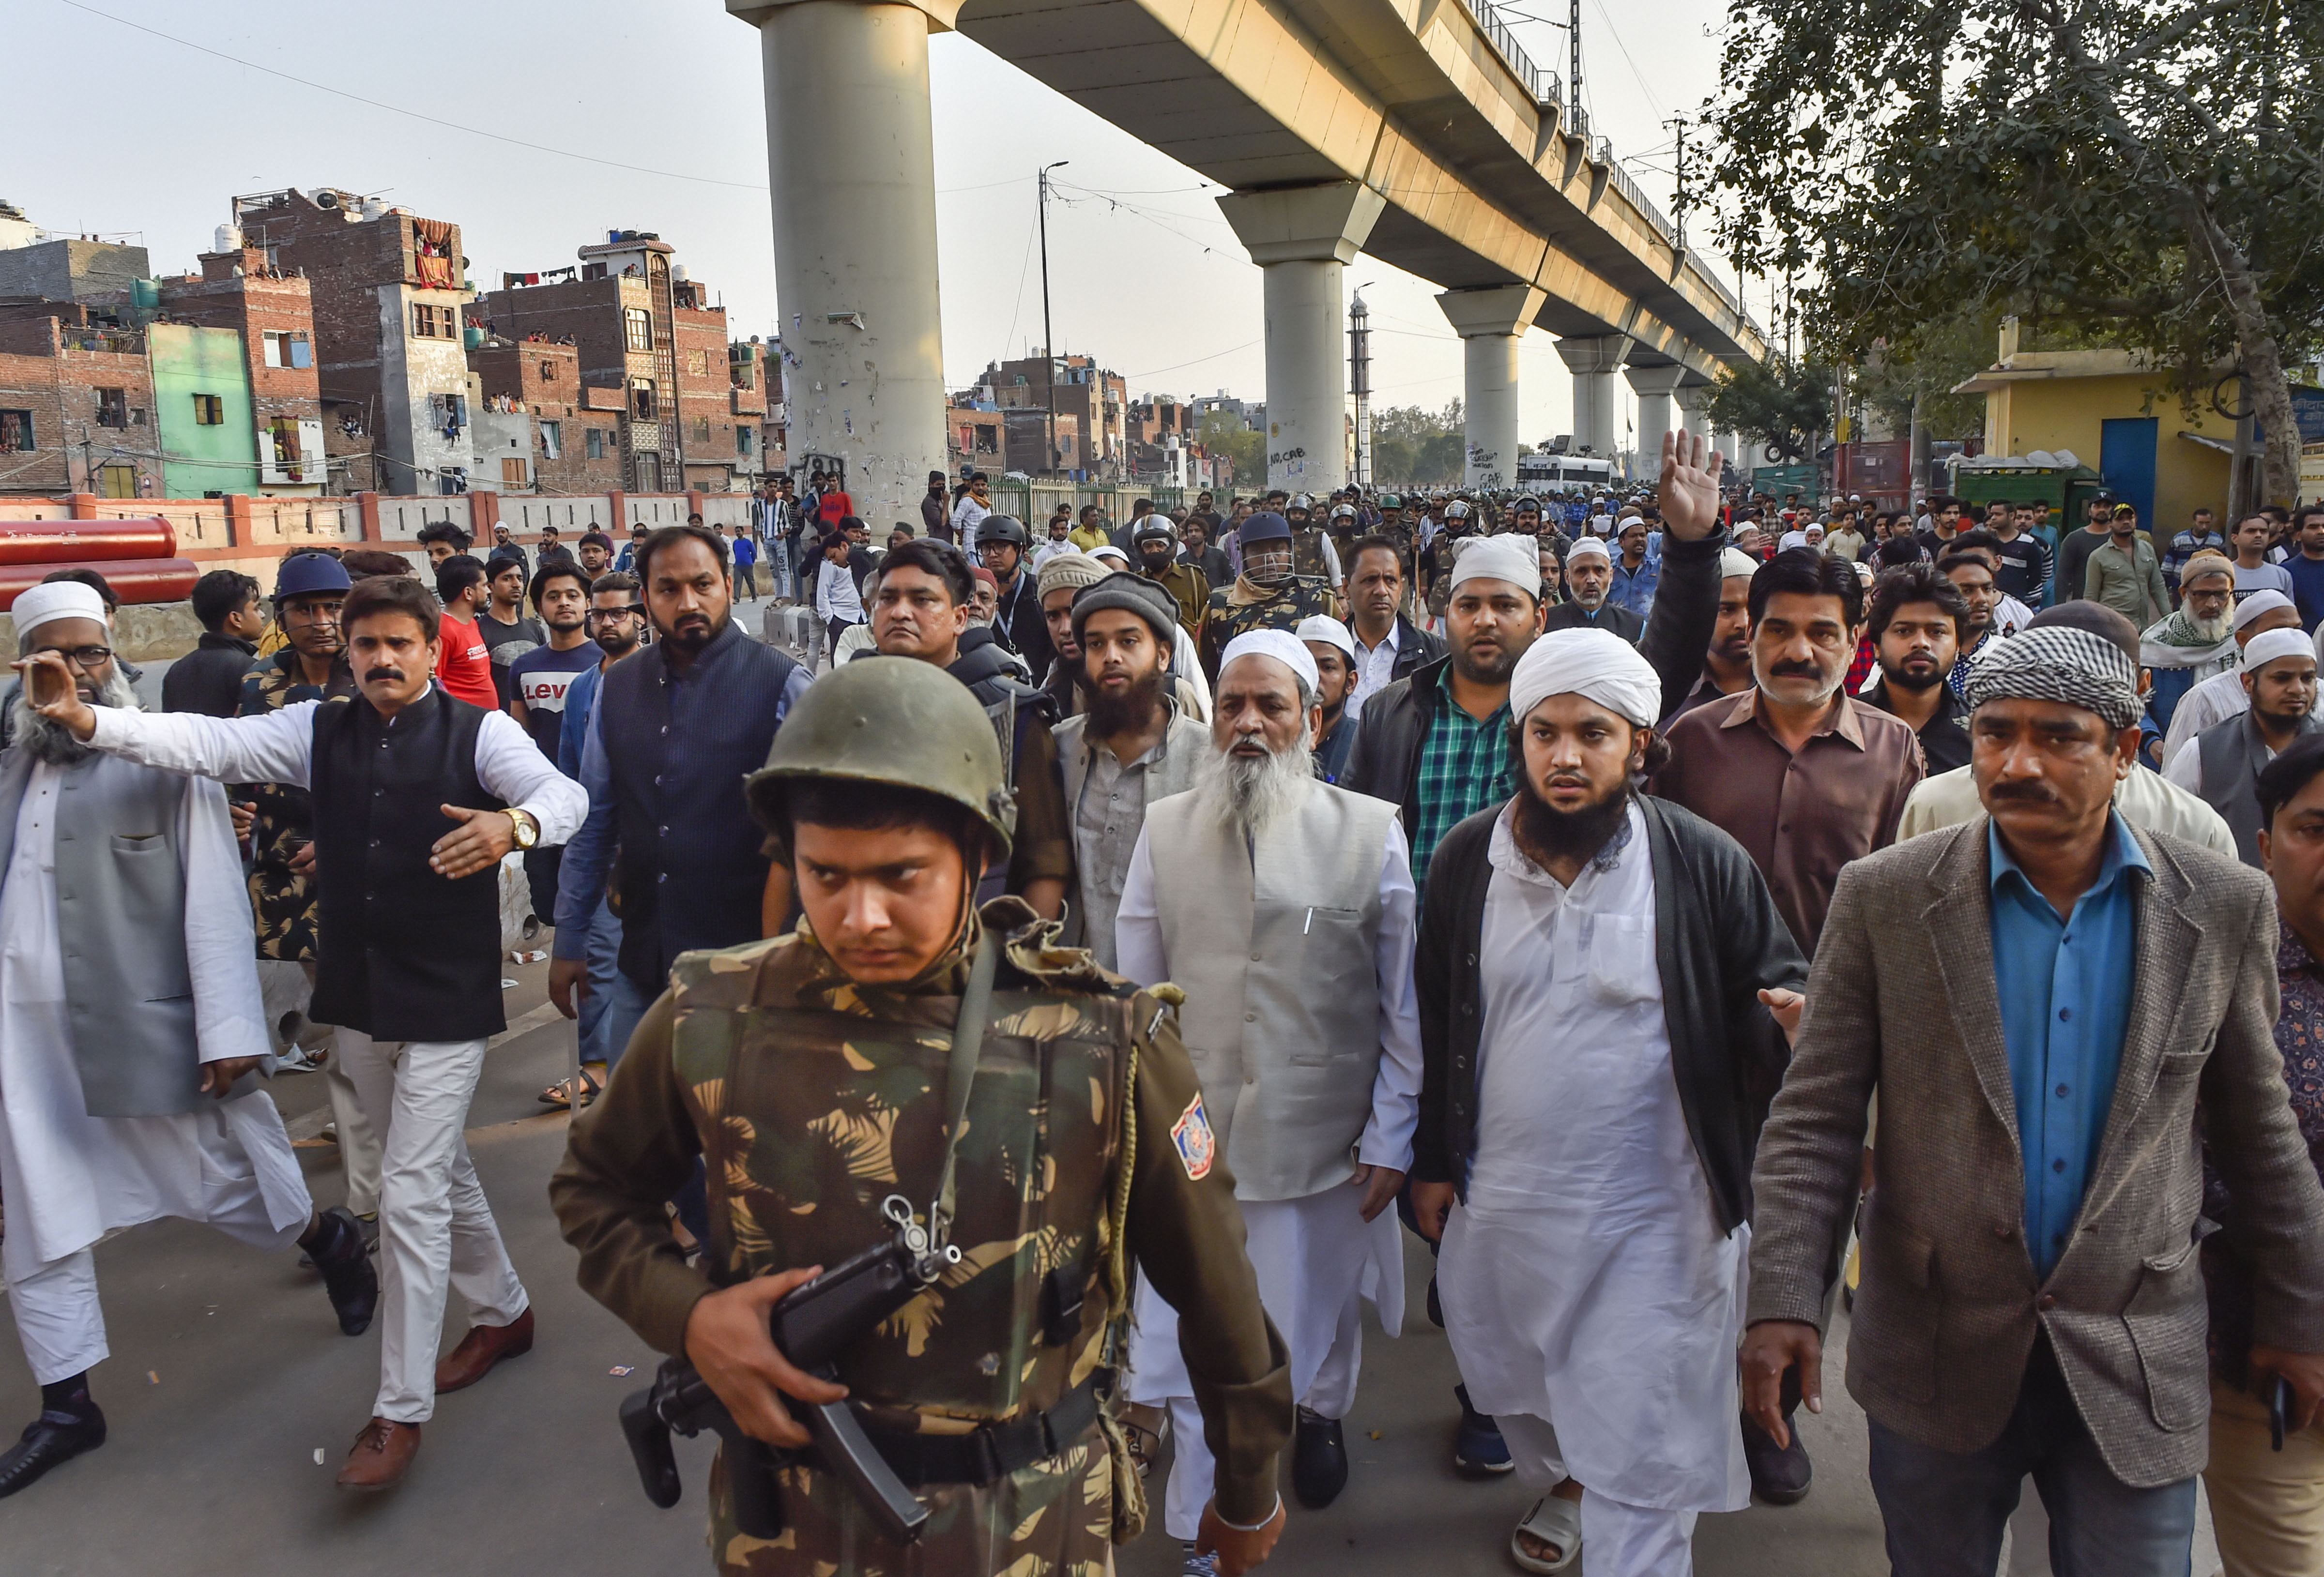 Amid violence in Delhi, Brijpuri residents take out a peace march